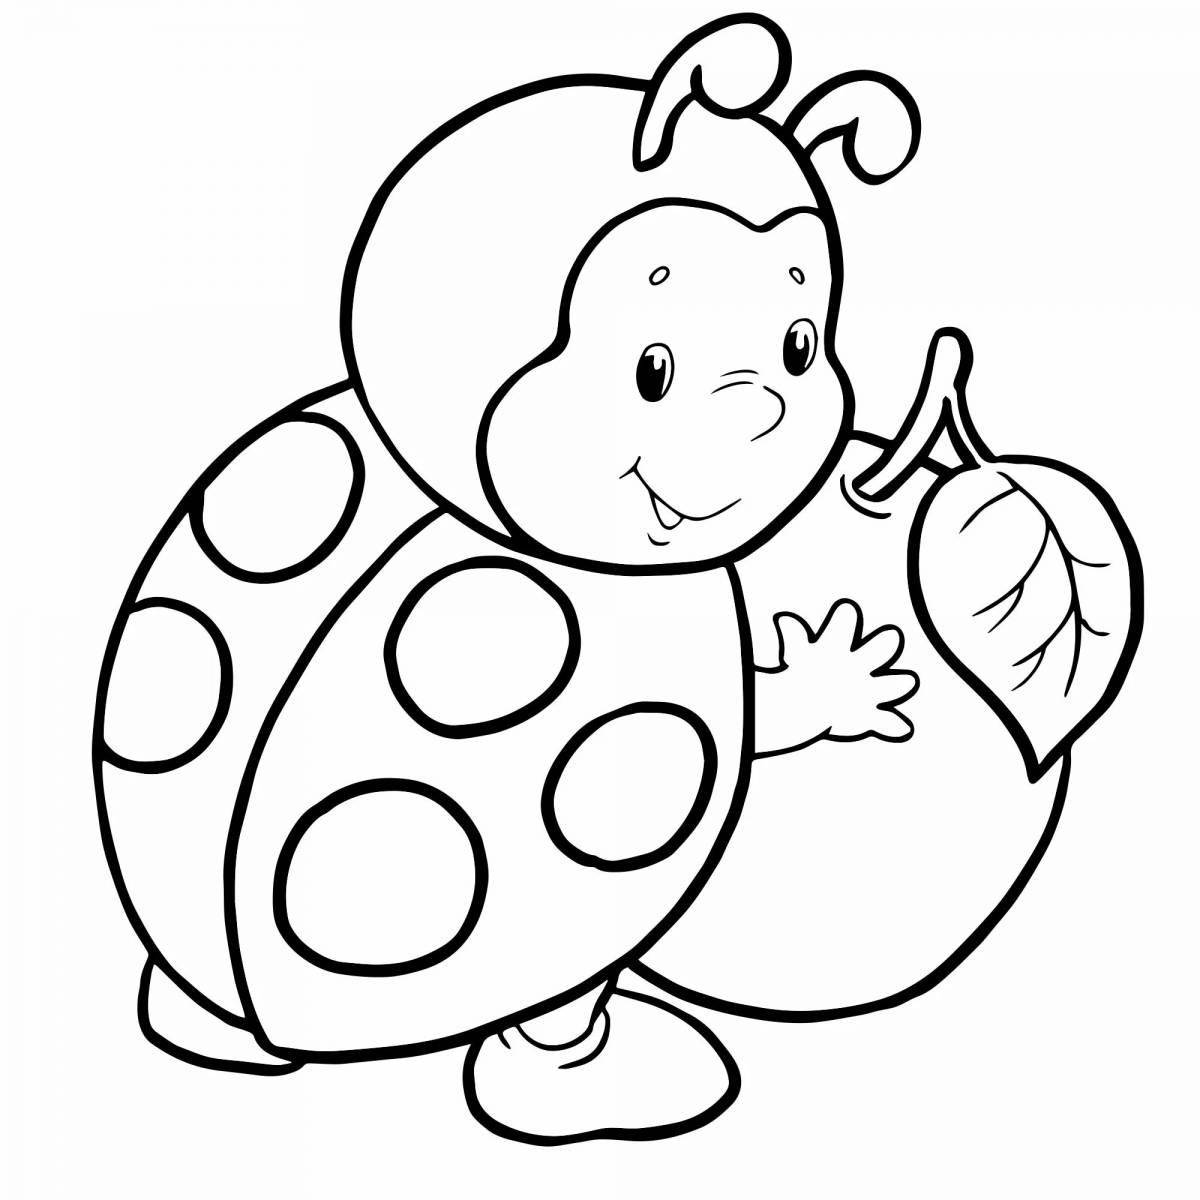 Exciting ladybug coloring book for kids